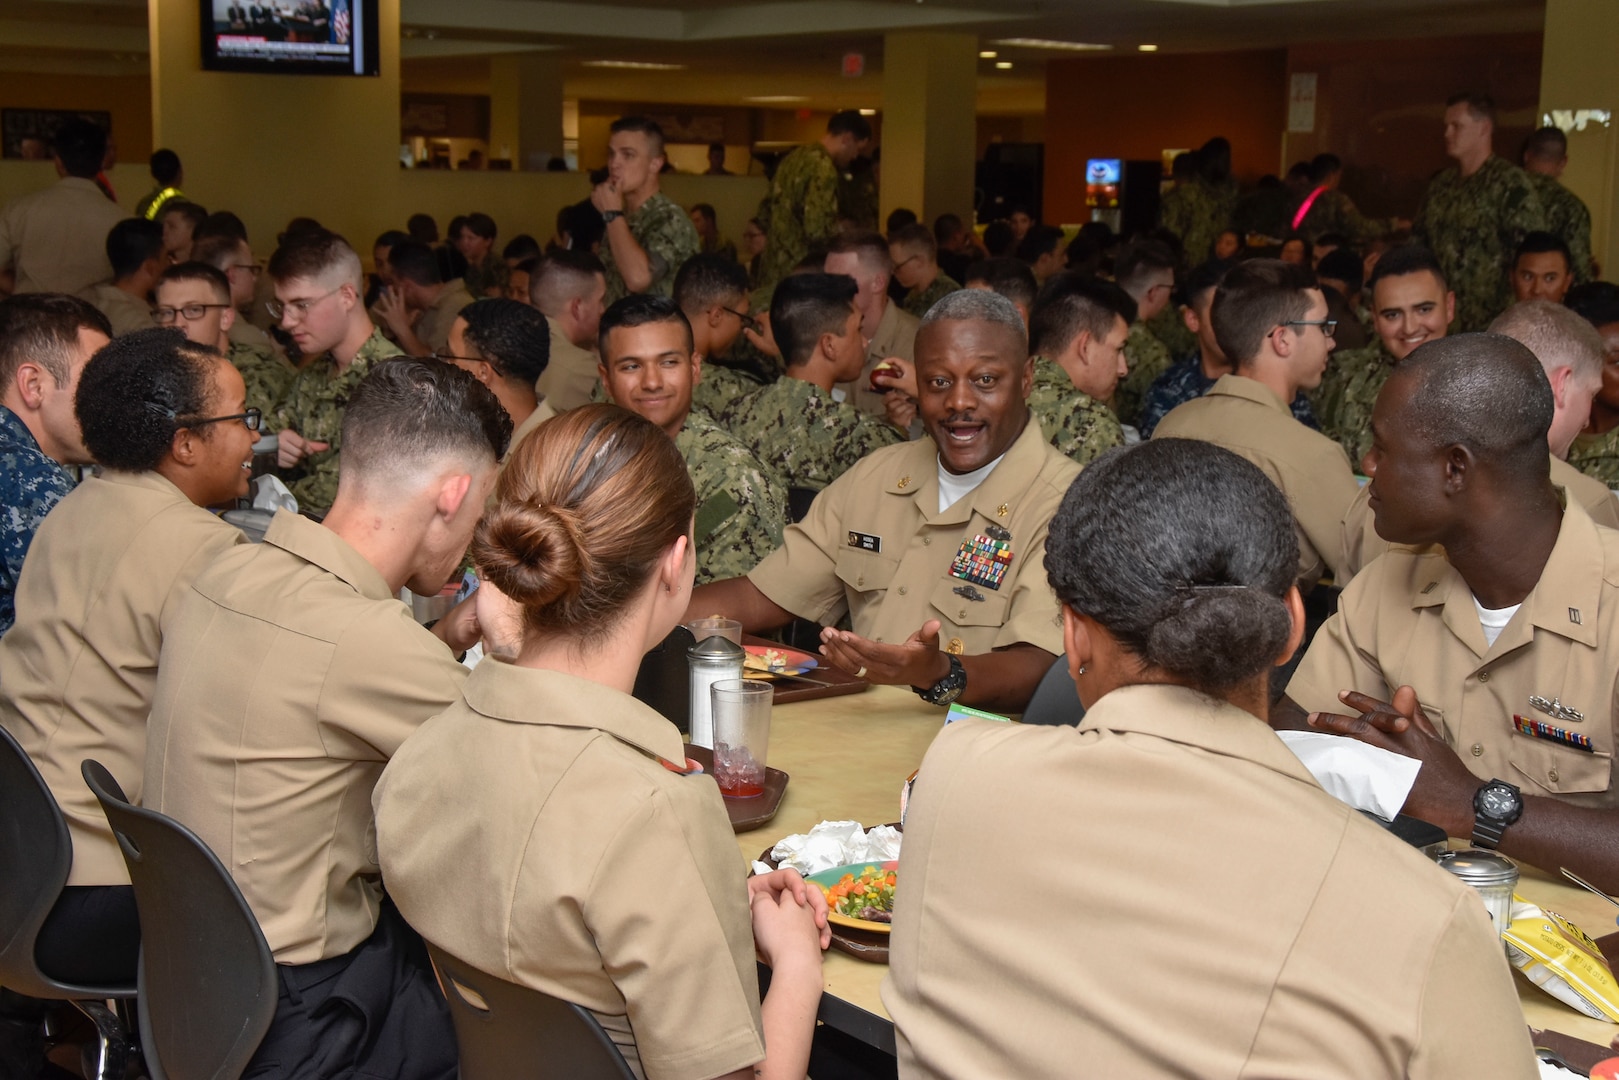 Force Master Chief Hosea Smith Jr., Hospital Corps director, eats lunch with Hospital Corpsman Basic students at a Joint Base San Antonio-Fort Sam Houston dining facility. Navy Medicine is a global health care network of 63,000 personnel that provides healthcare support to the U.S. Navy and Marine Corps personnel, veterans and their families in high operational tempo environments, expeditionary medical facilities, medical treatment facilities, hospitals, clinics, hospital ships and research units around the world.